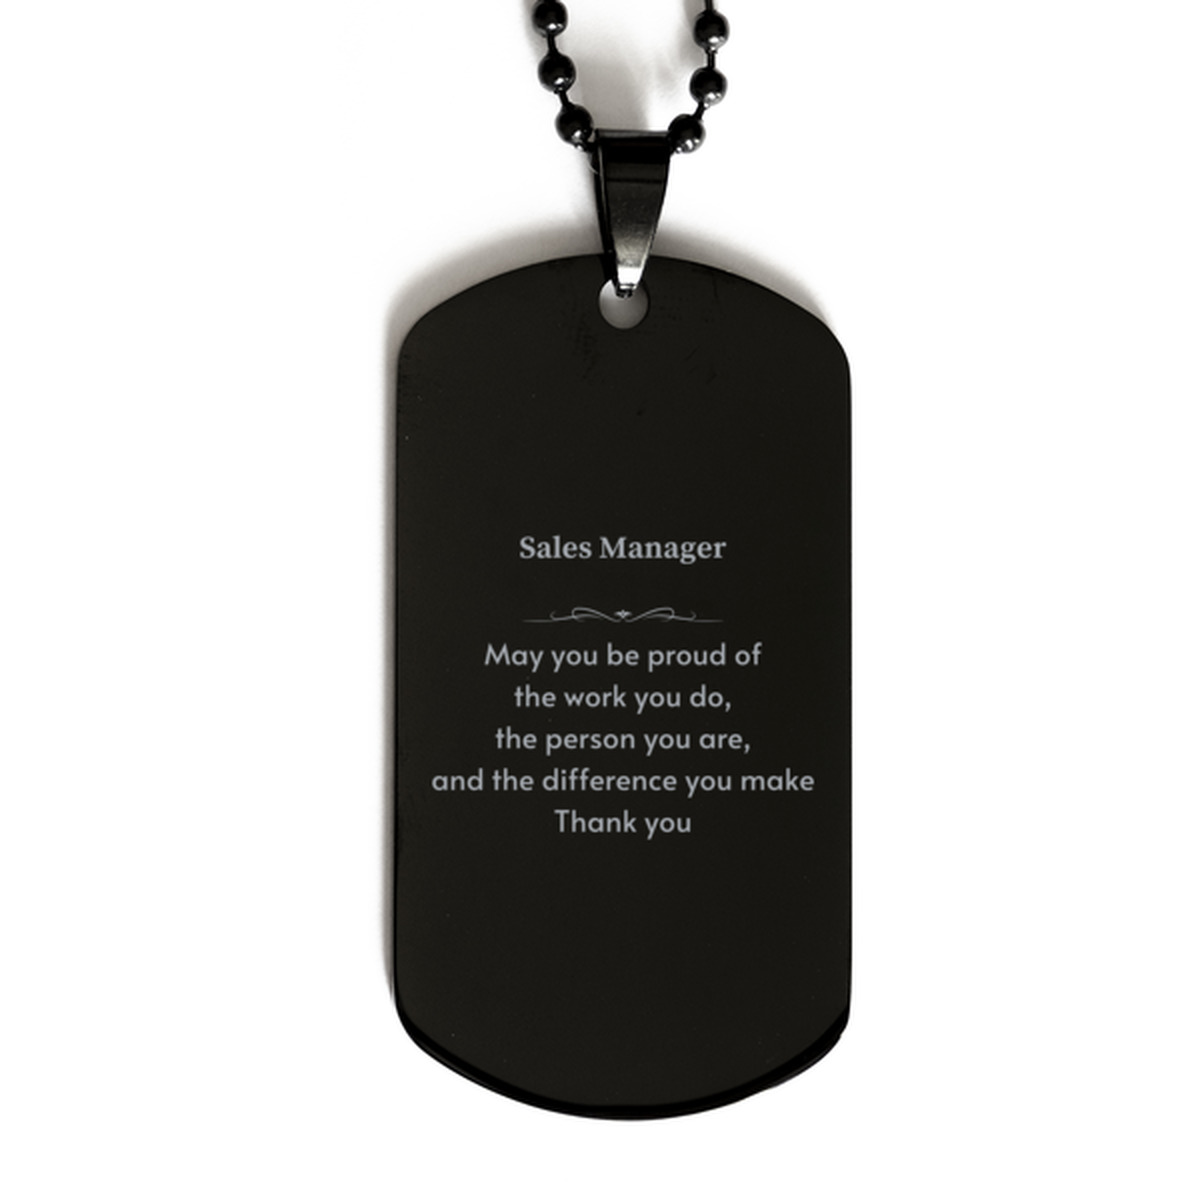 Heartwarming Black Dog Tag Retirement Coworkers Gifts for Sales Manager, Sales Manager May You be proud of the work you do, the person you are Gifts for Boss Men Women Friends